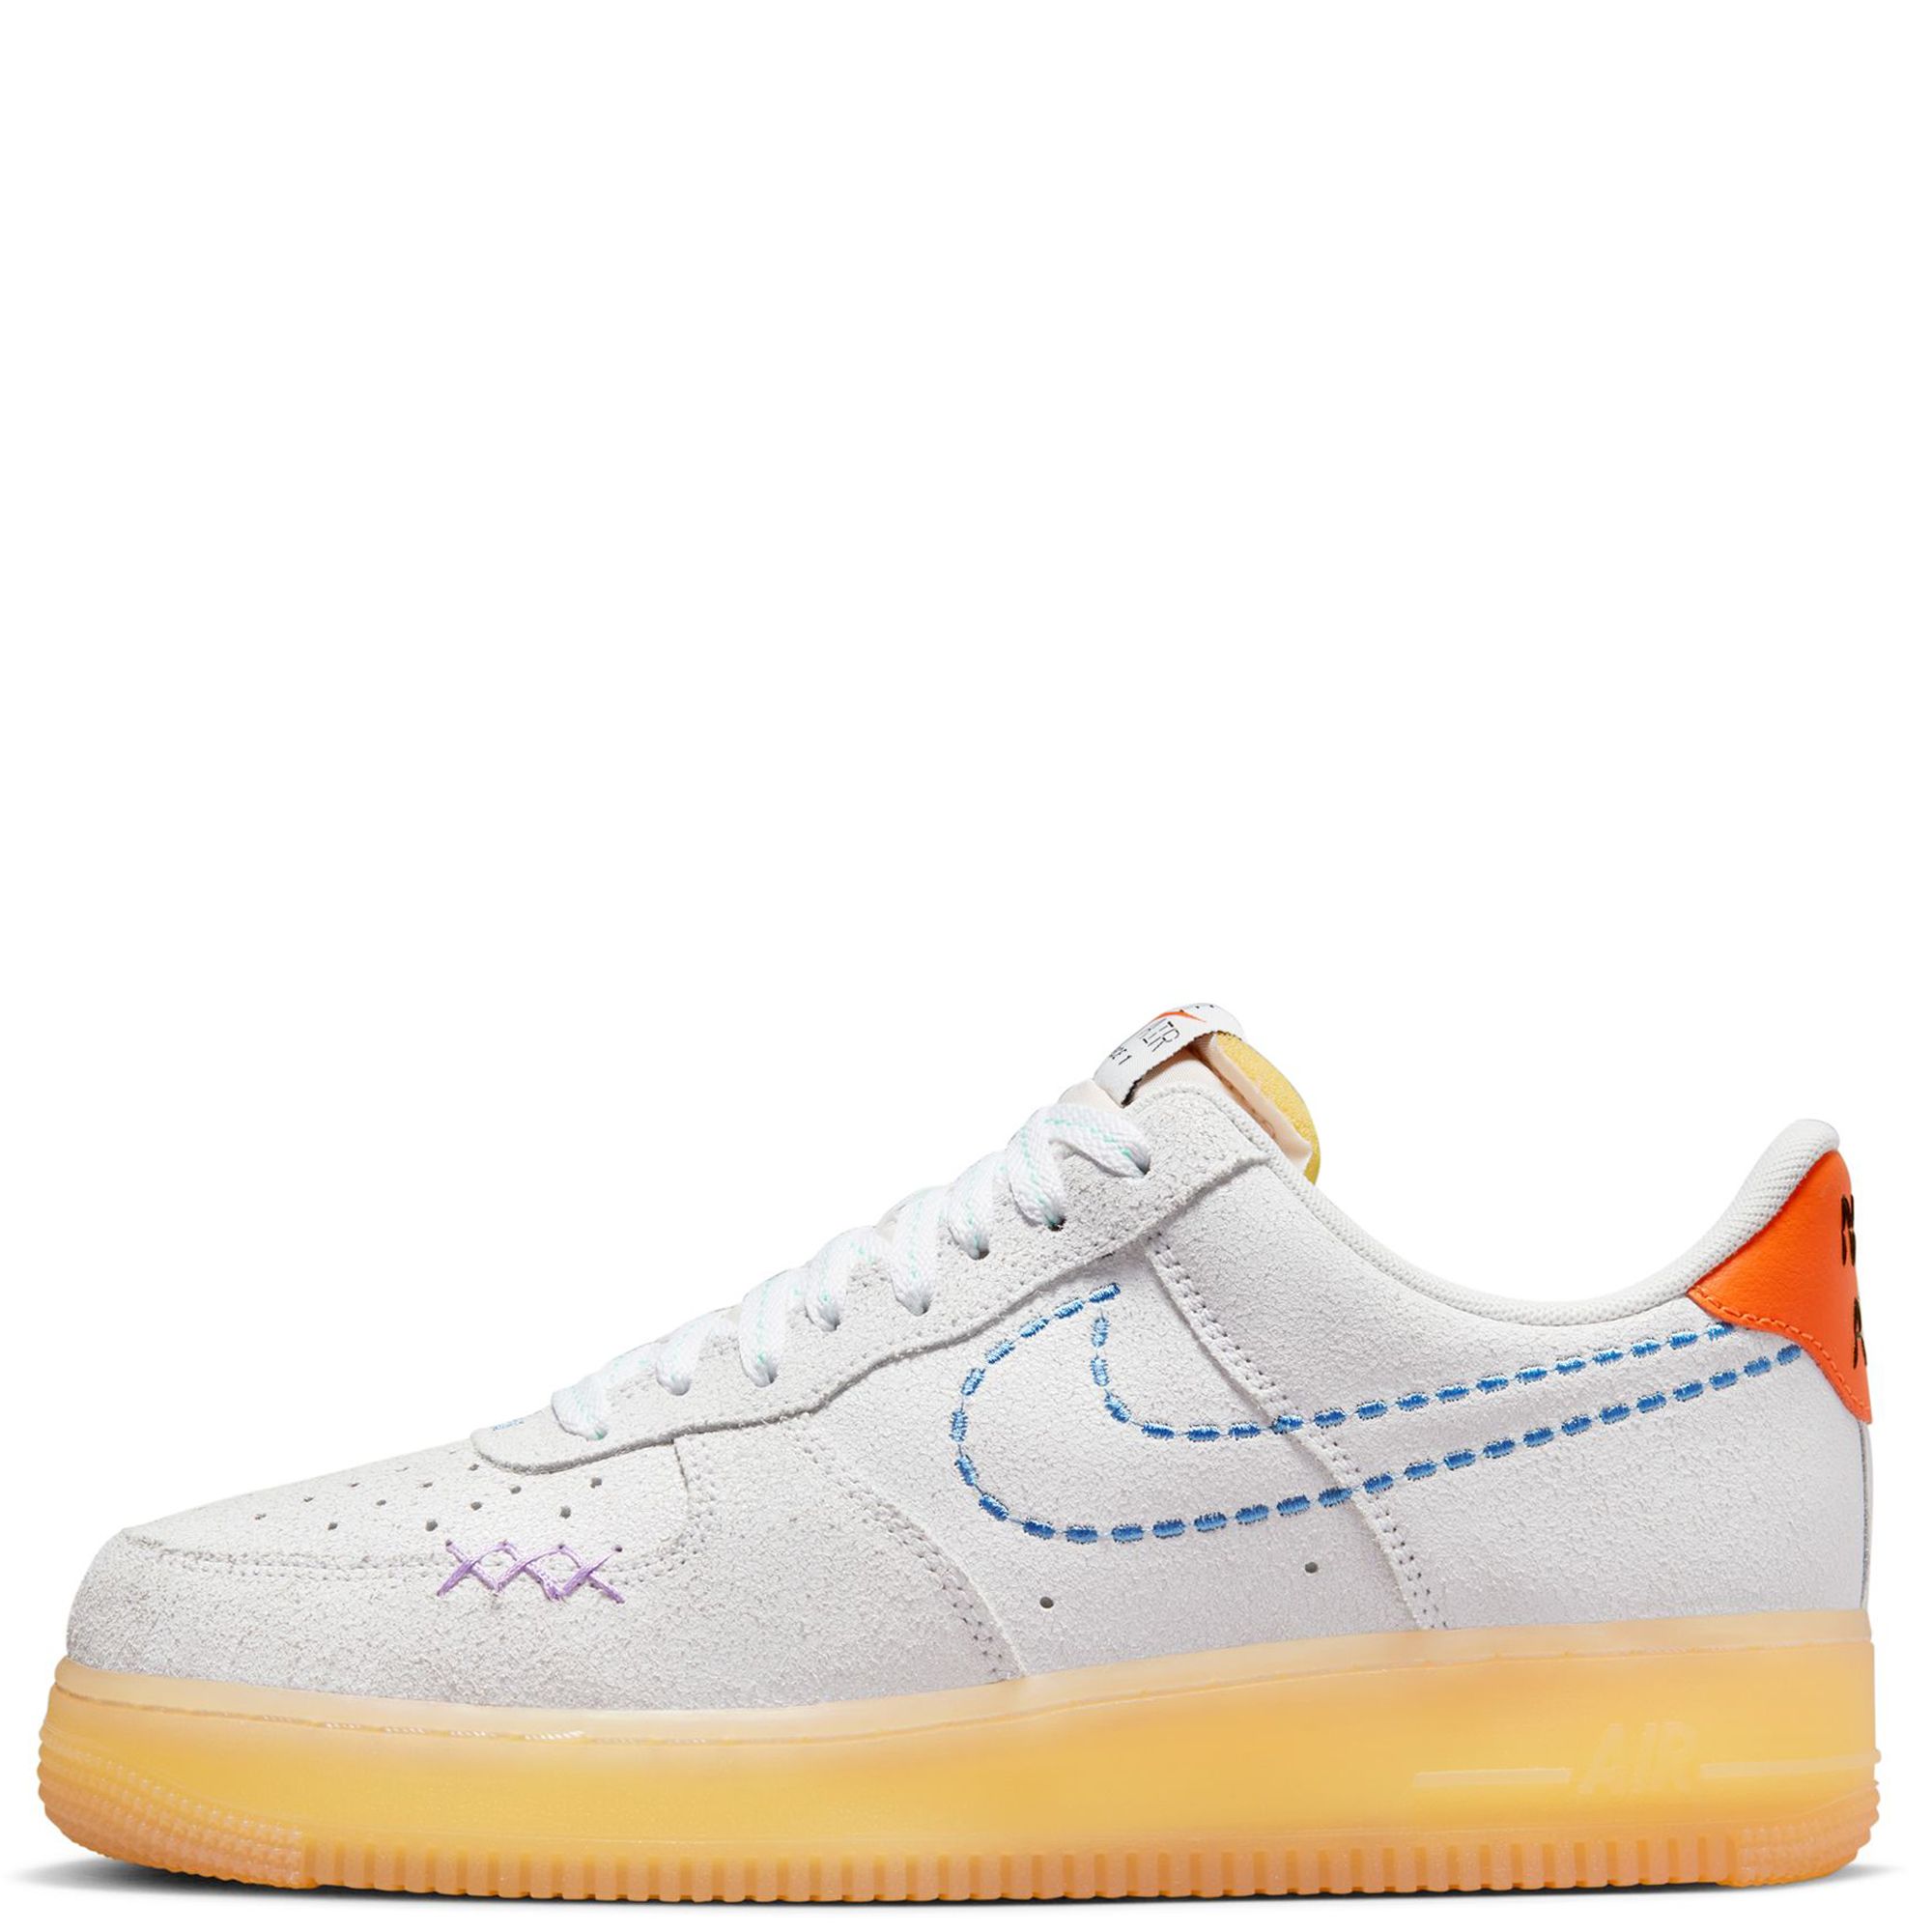 Opsommen stopcontact Glans NIKE Air Force 1 '07 LV8 DX2344 100 - Shiekh